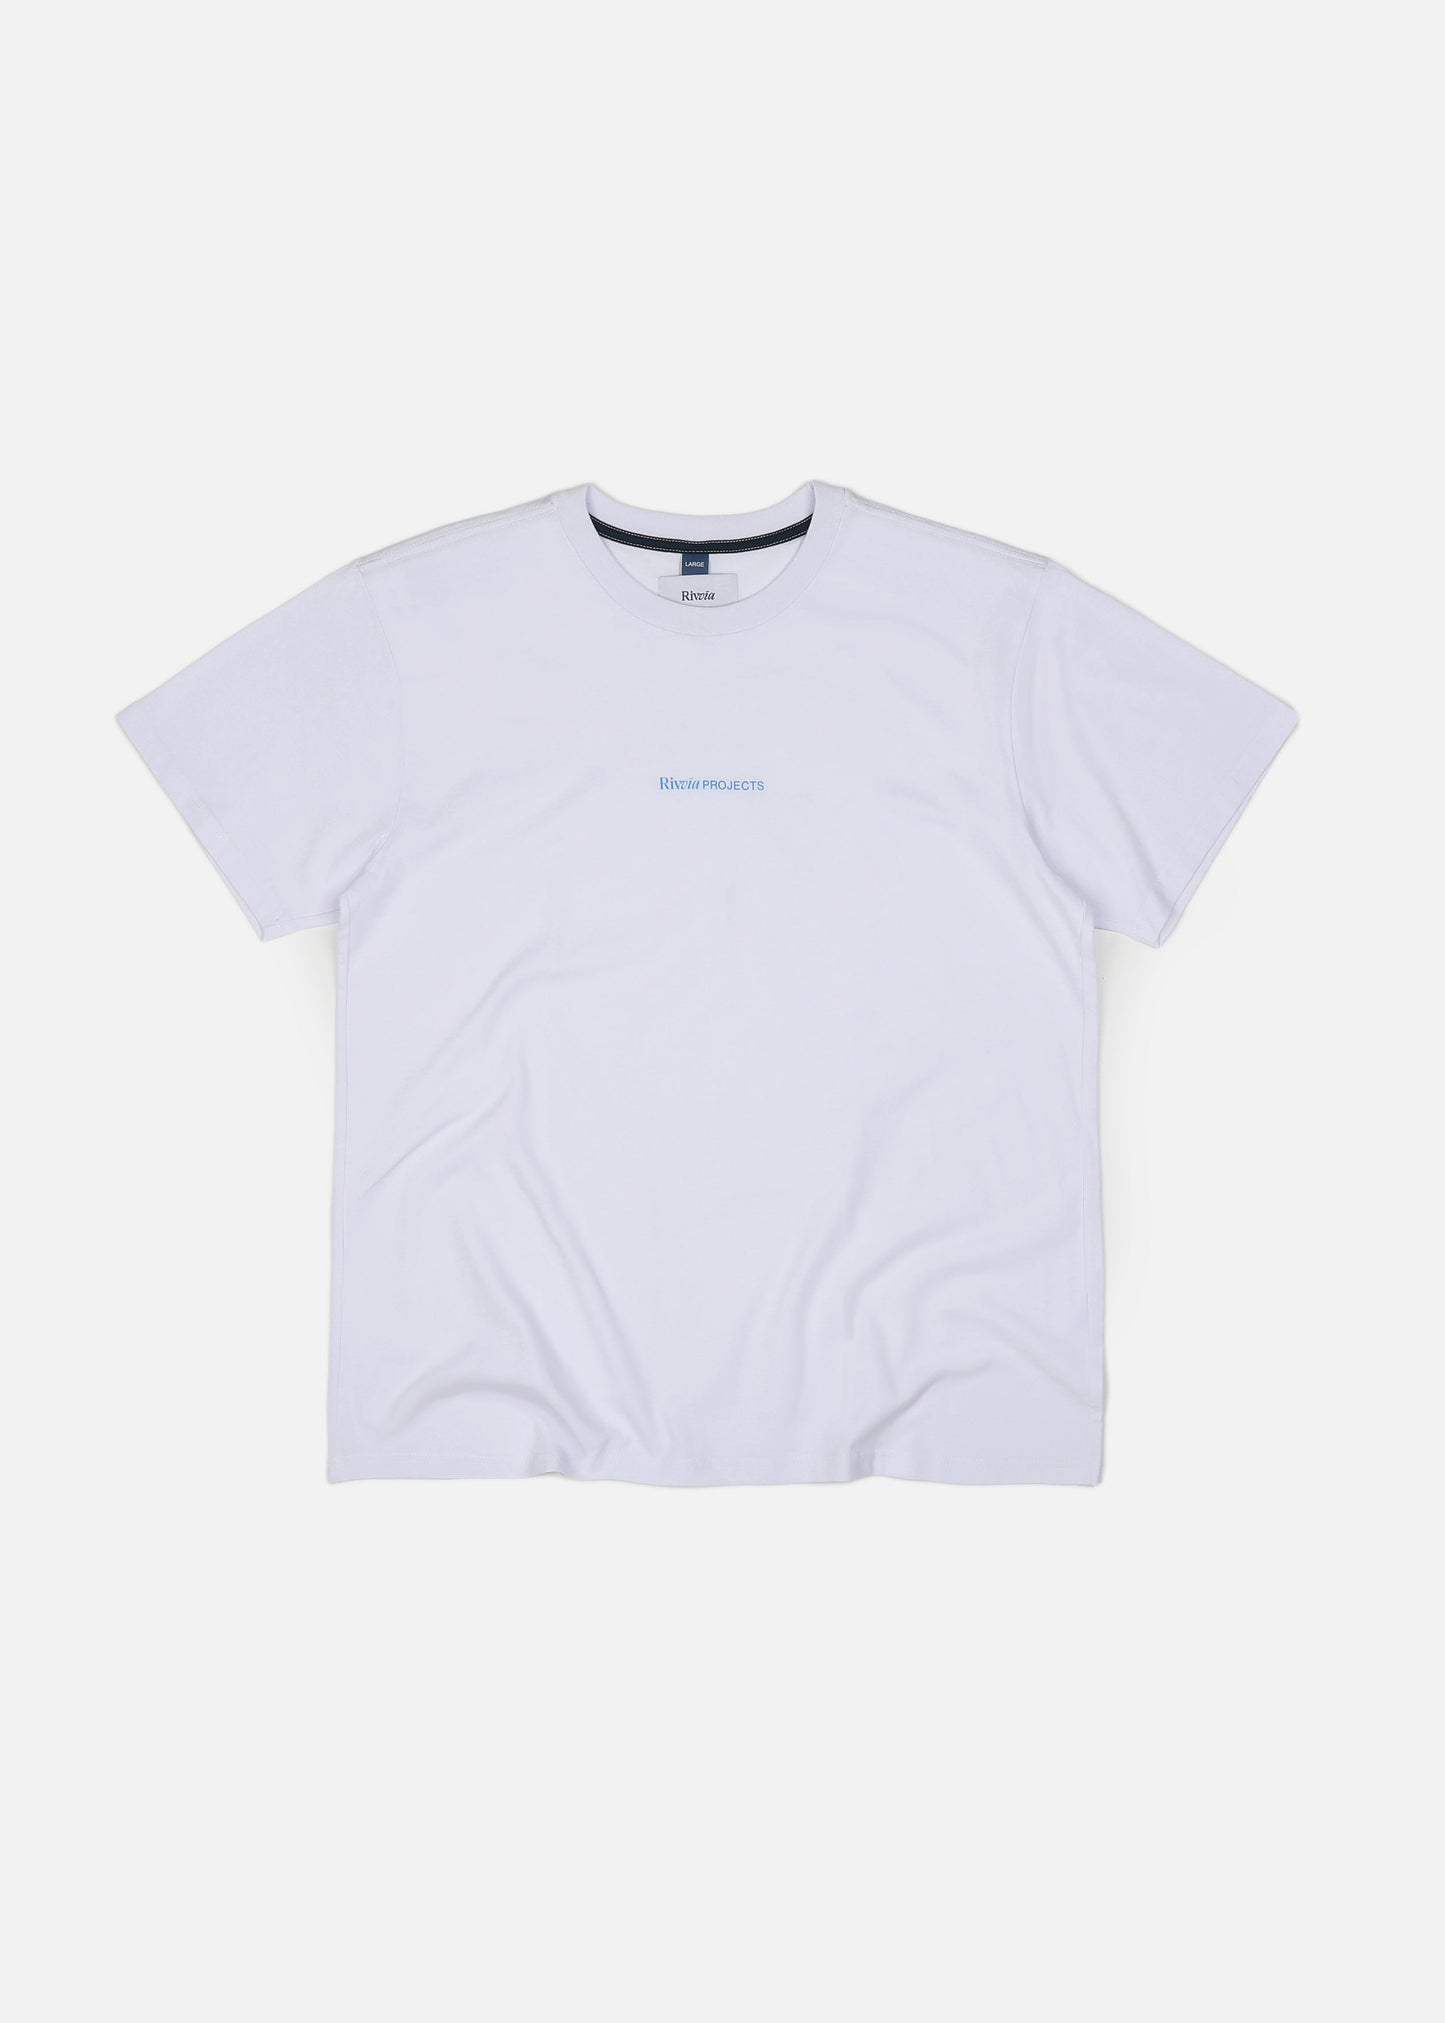 PROJECTING T-SHIRT : WHITE